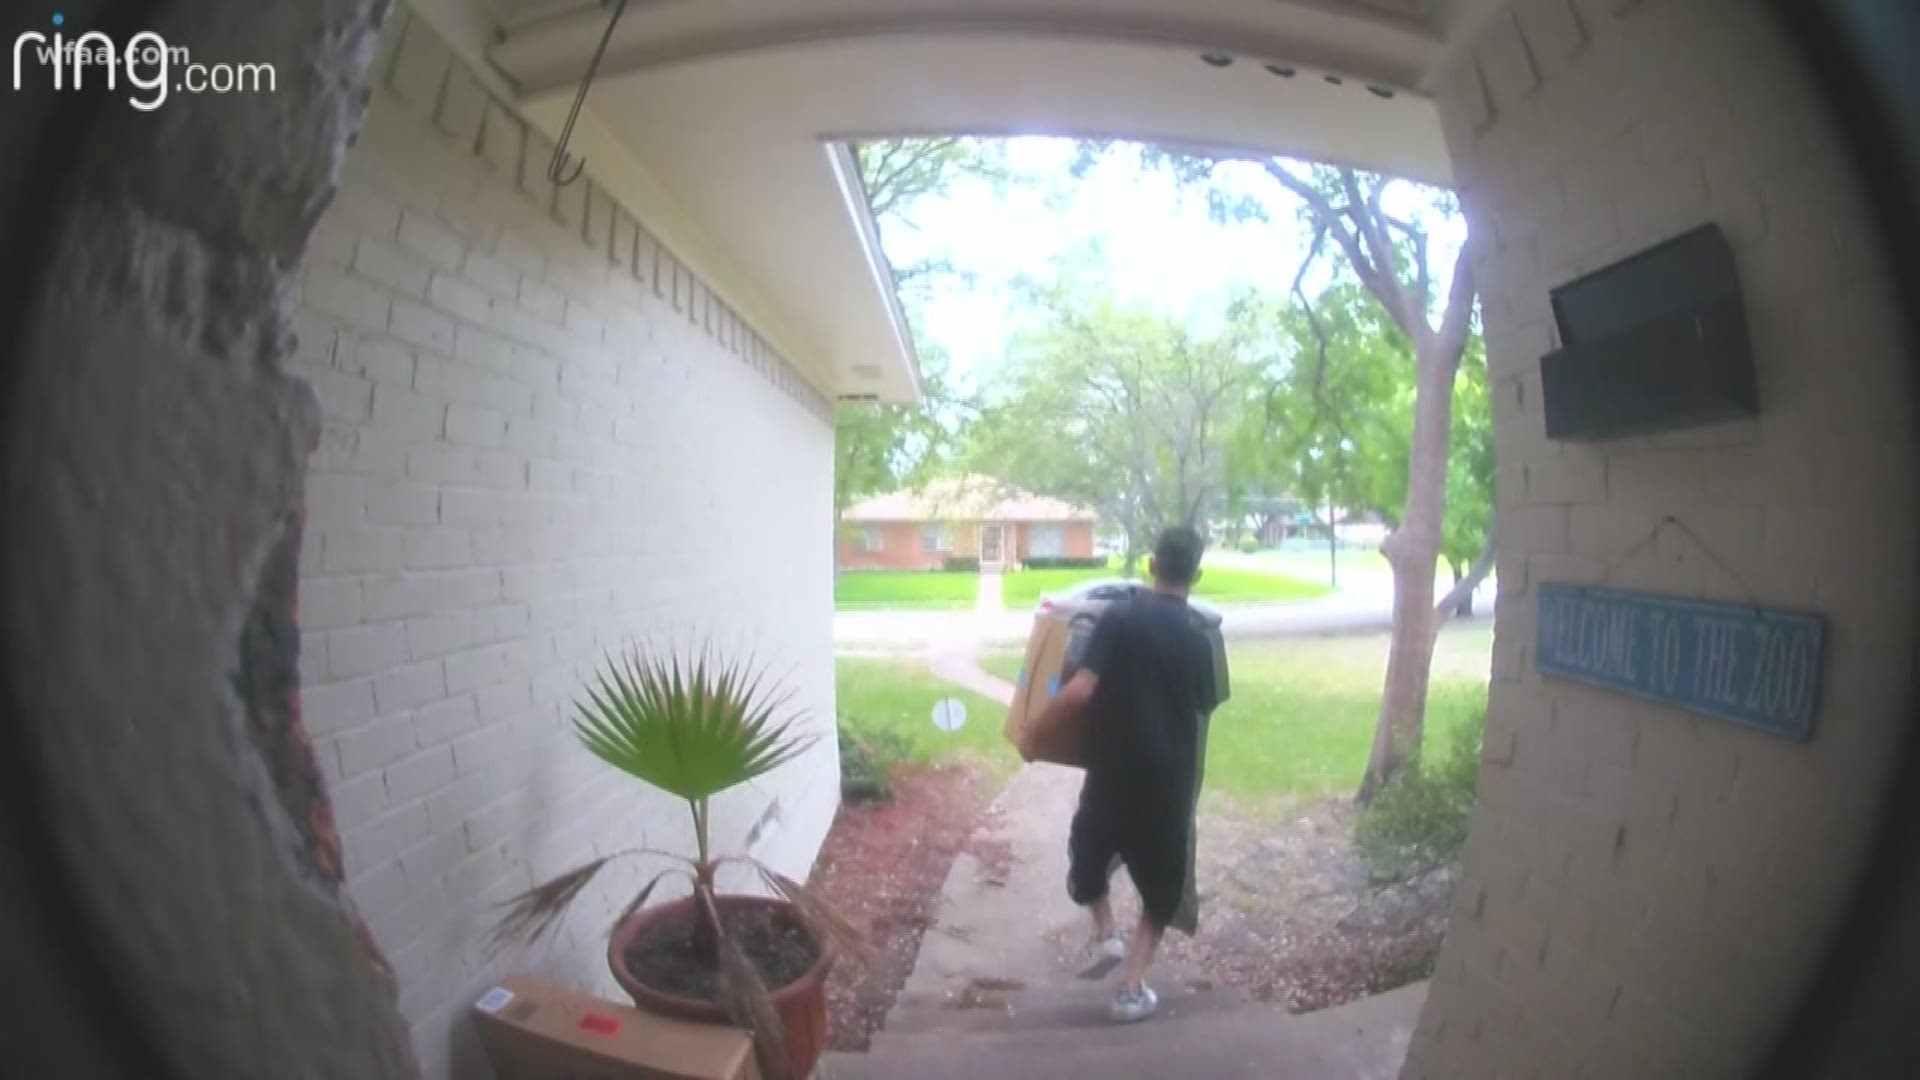 Tracking system follows porch pirates